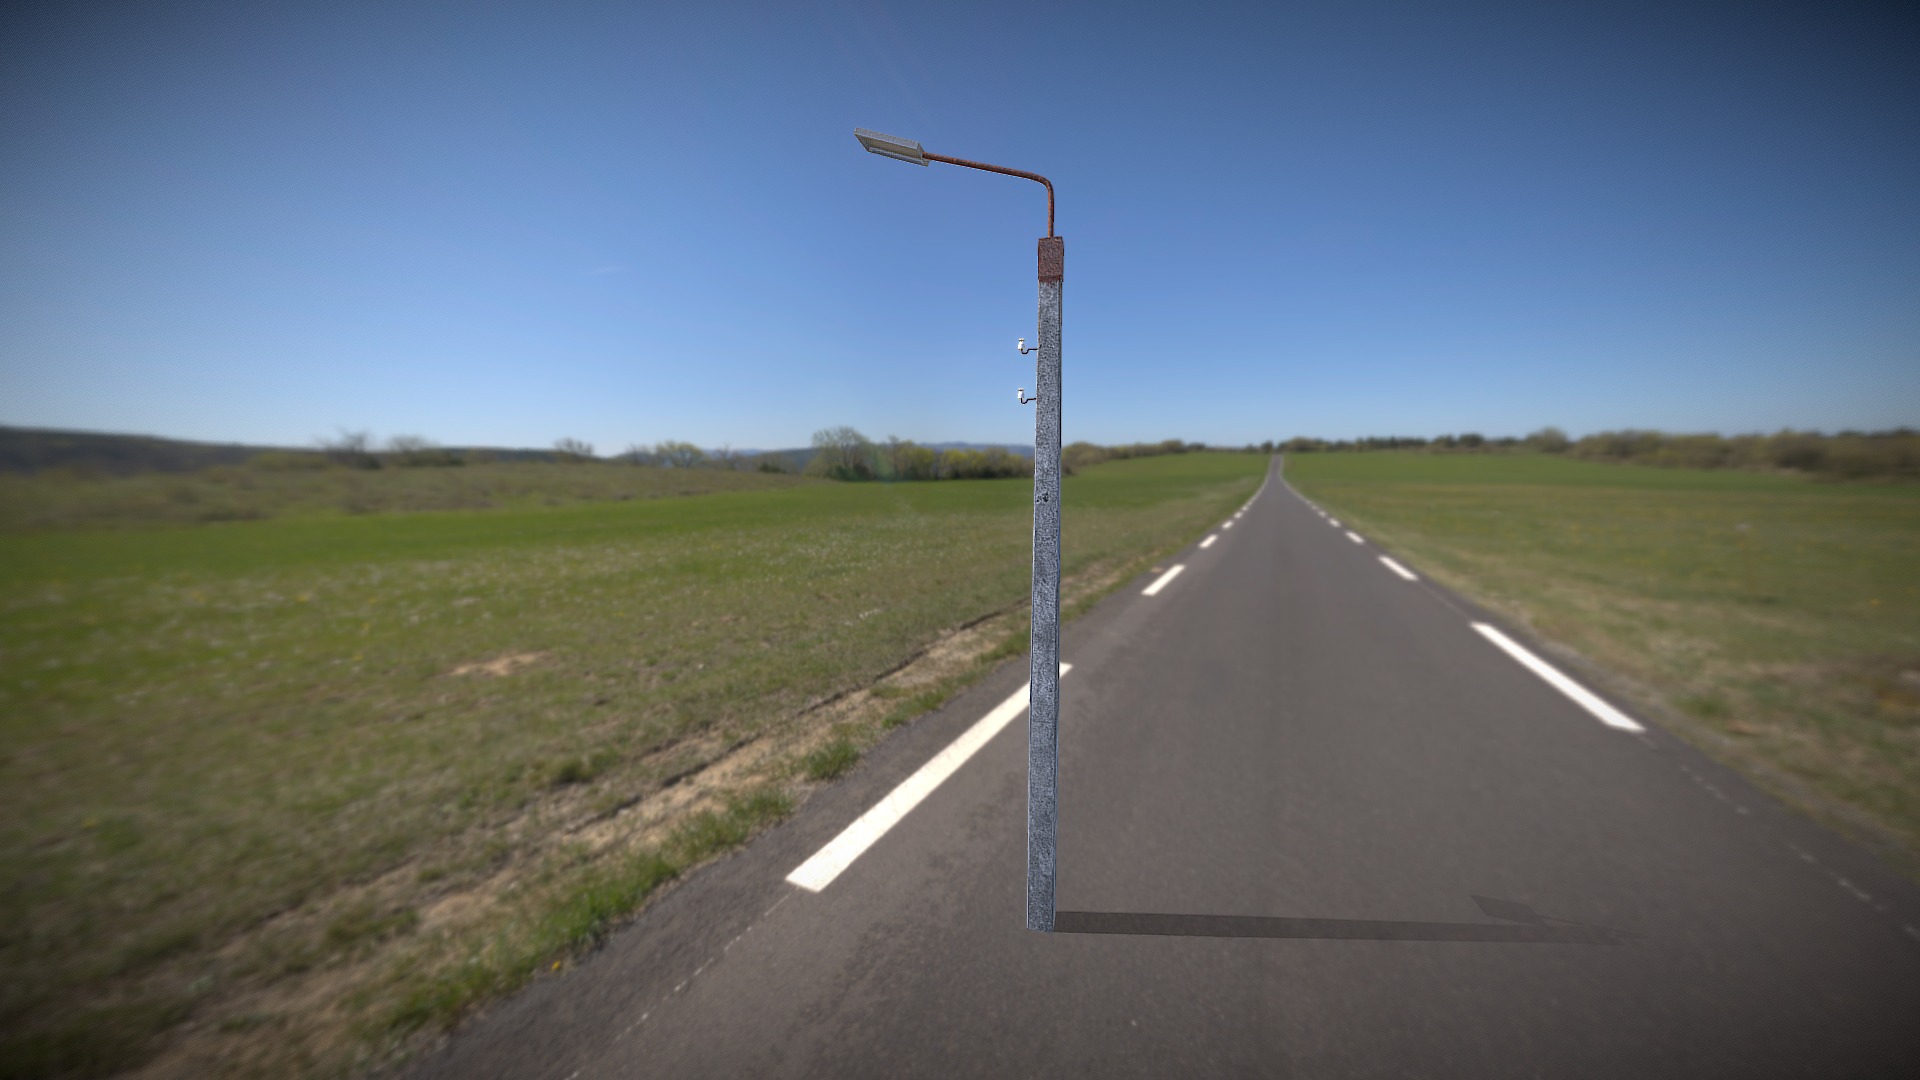 3D model Lamp Post 1 - This is a 3D model of the Lamp Post 1. The 3D model is about a road with a pole on the side.